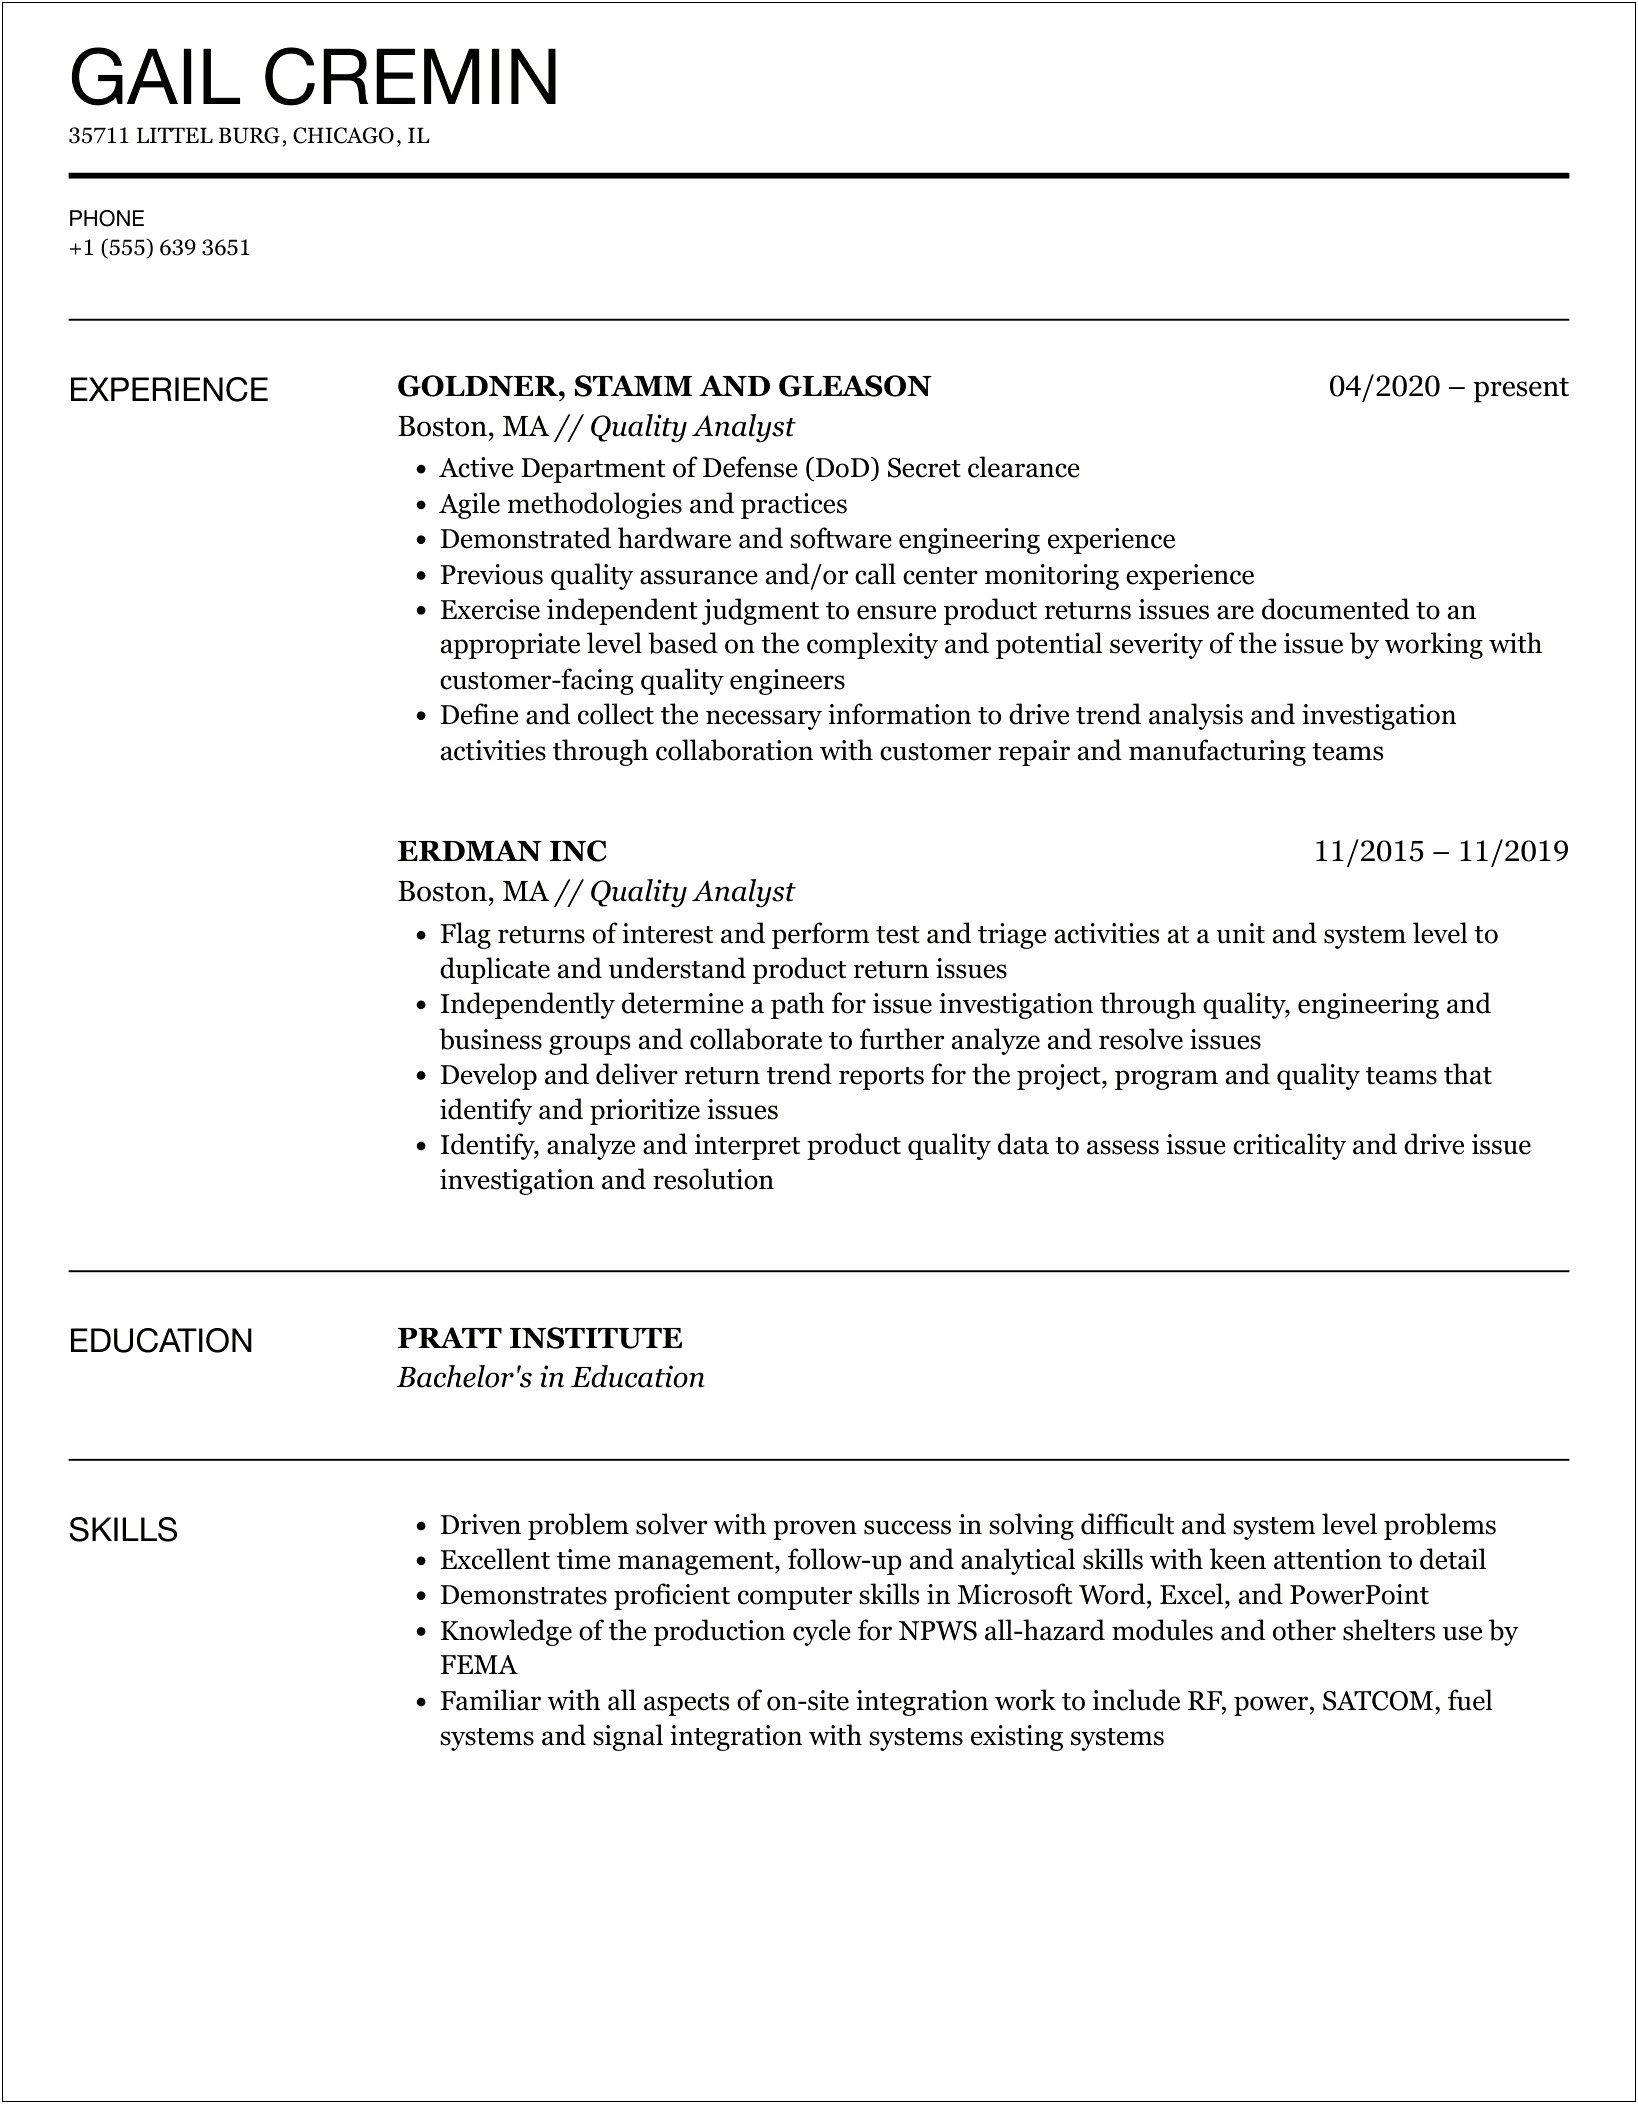 Concentrix Quality Analyst Job Duties For Resume